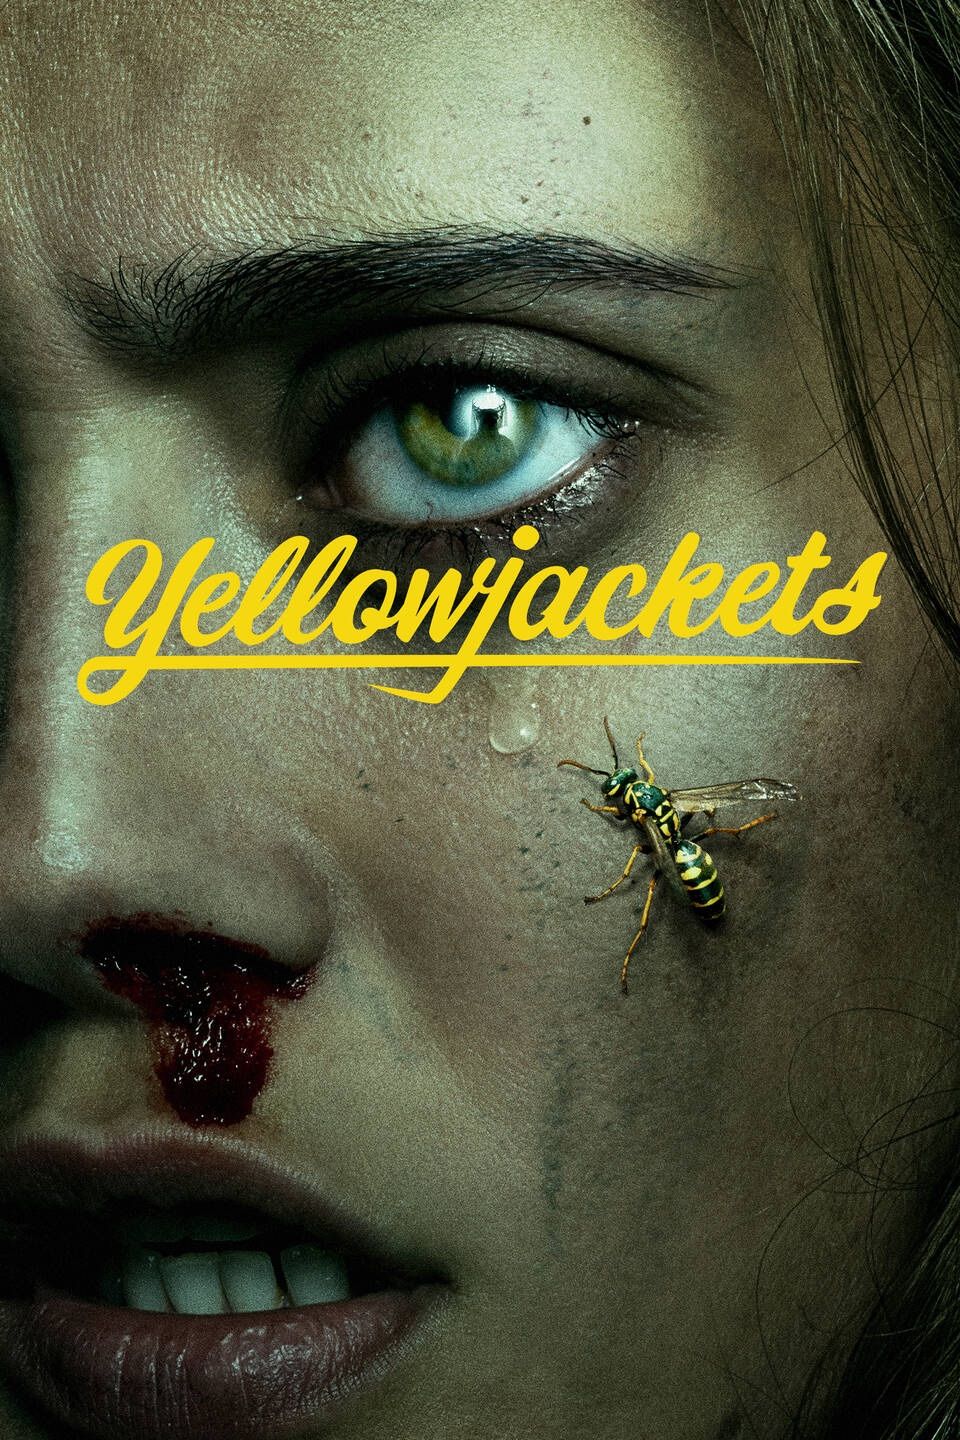 yellowjackets season 3 gets exciting update from co-creator